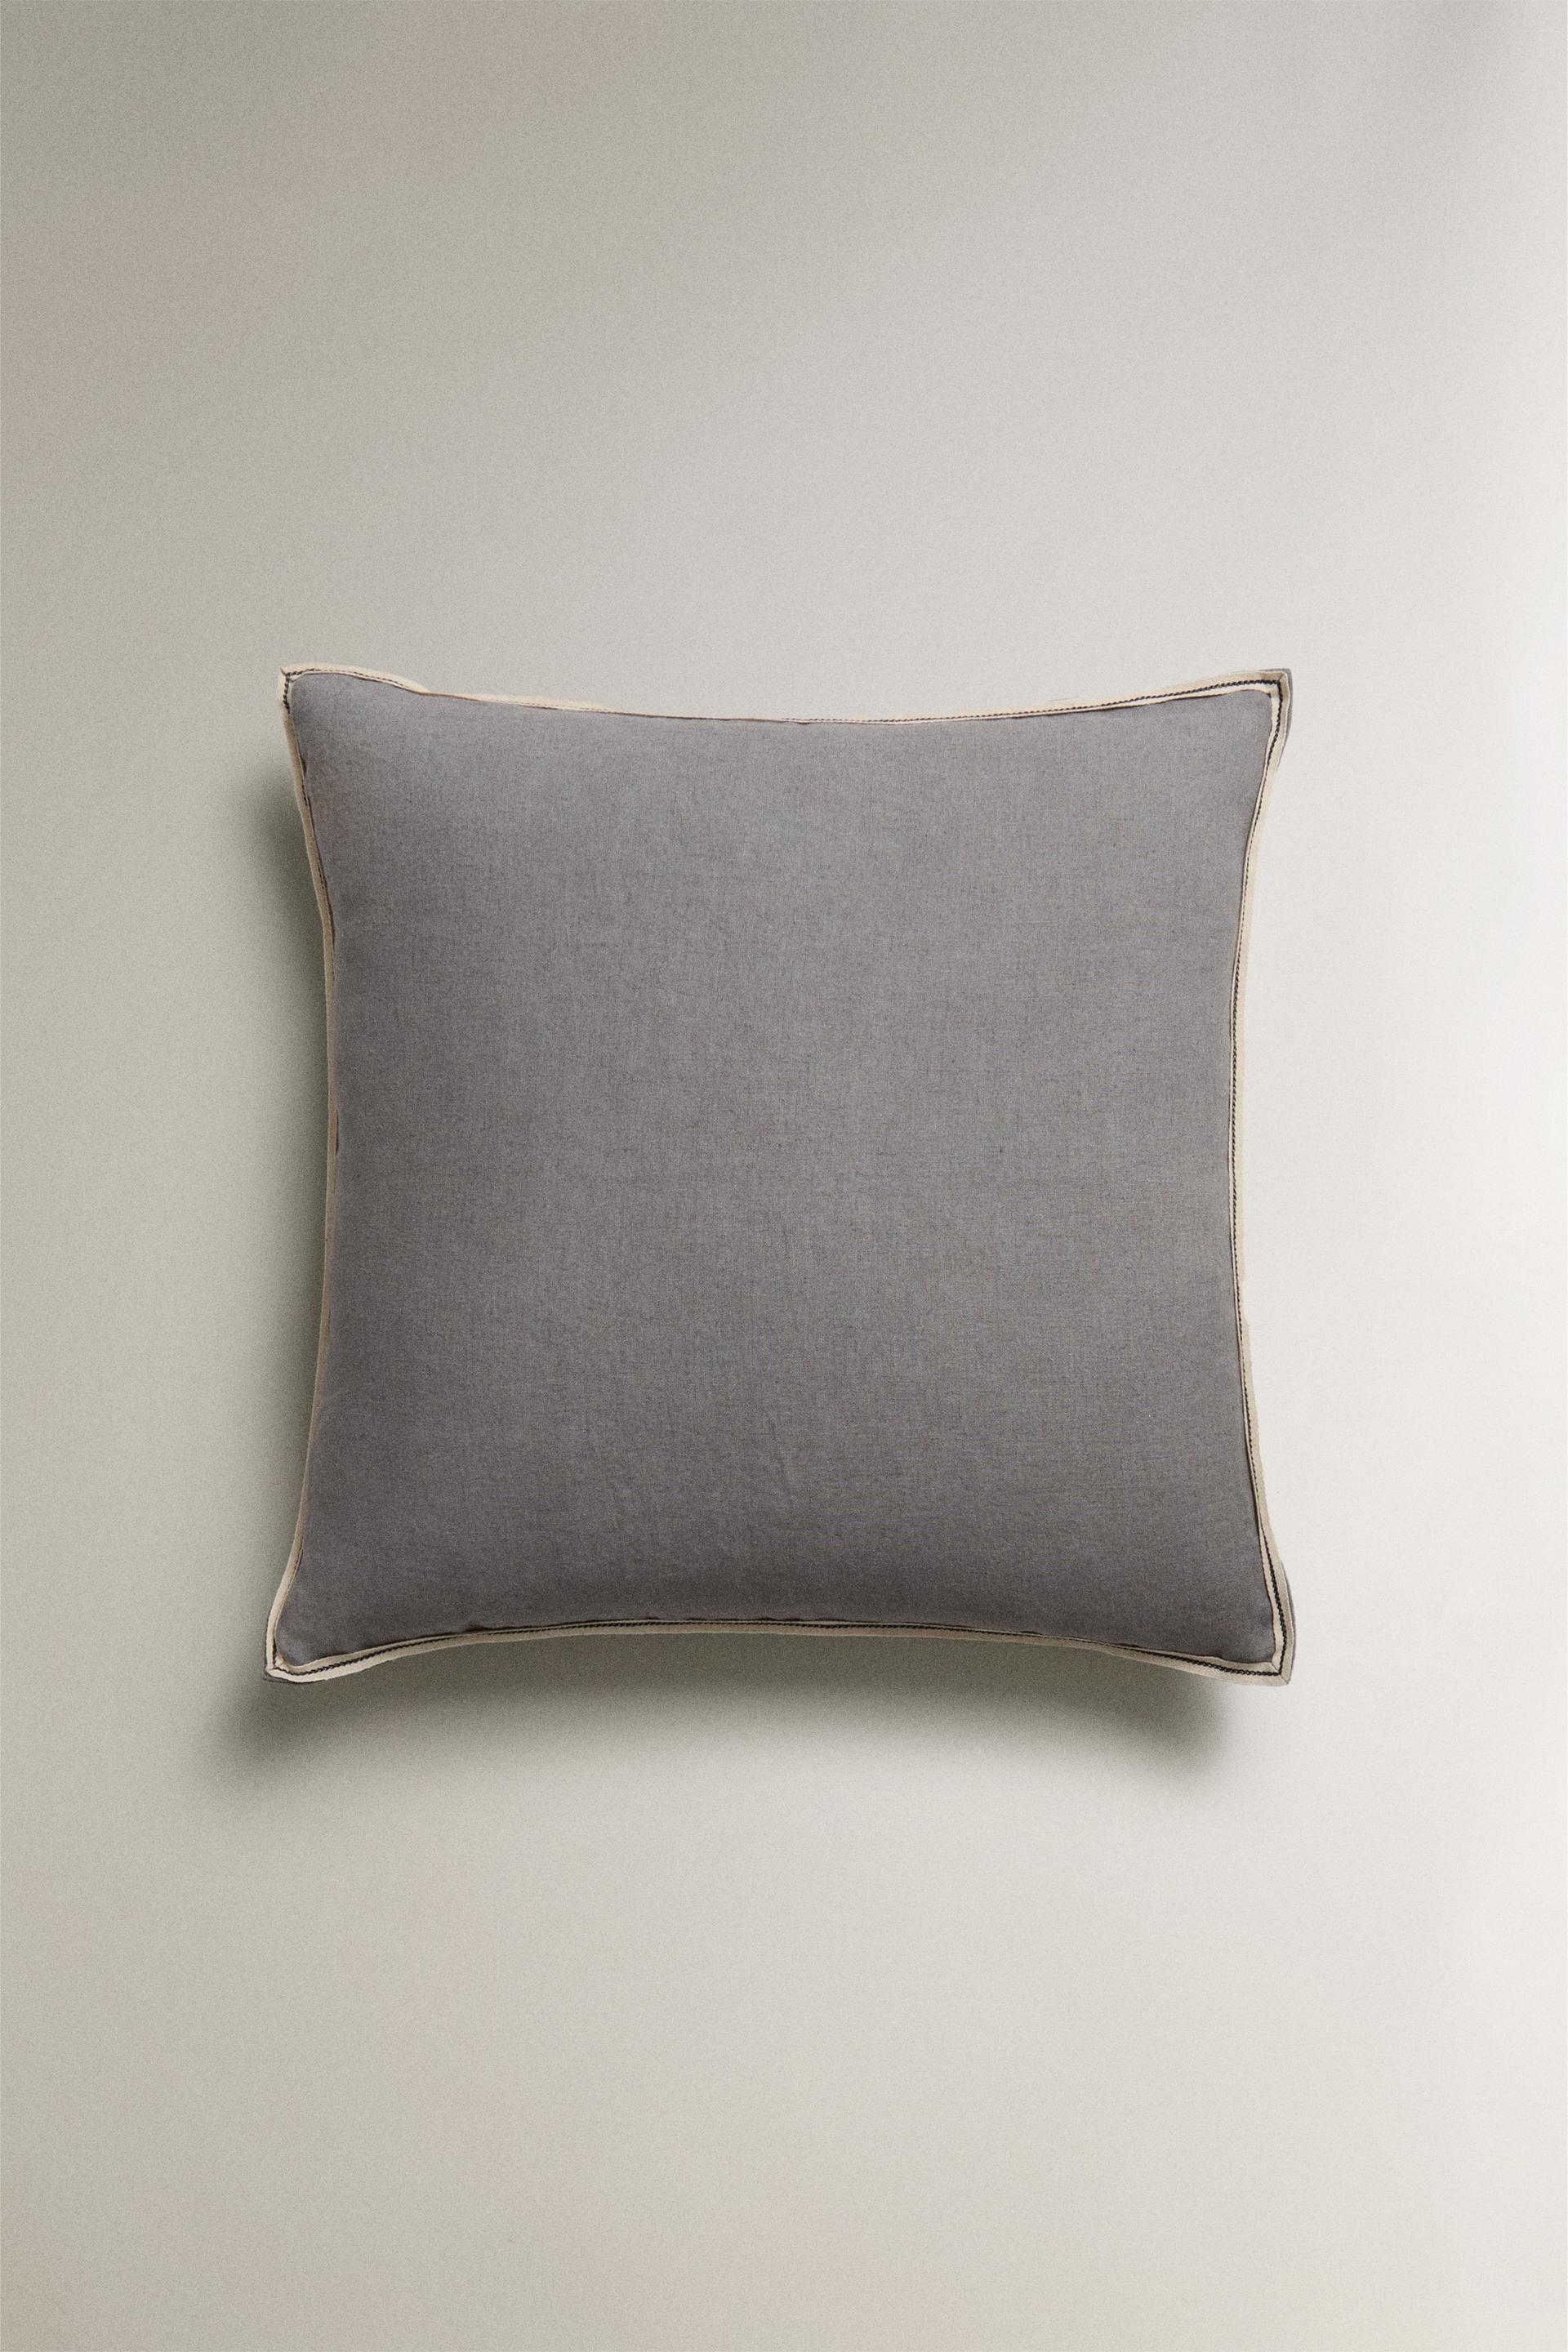 THROW PILLOW COVER WITH CONTRAST TOPSTITCHING ZARA